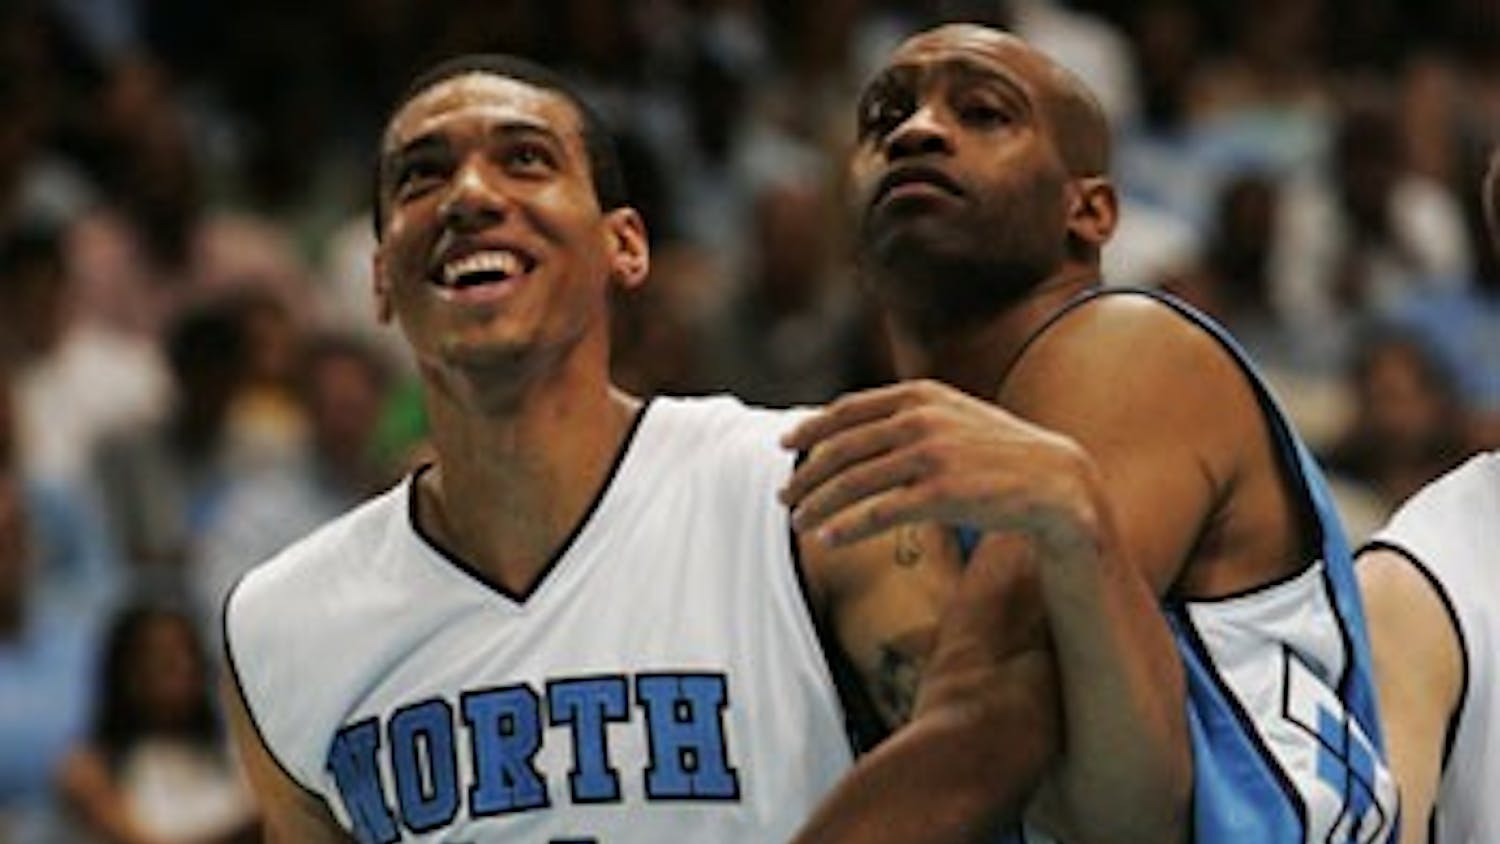 Former UNC players Danny Green (left) and Vince Carter goof off during a foul shot during UNC’s alumni game Friday night.